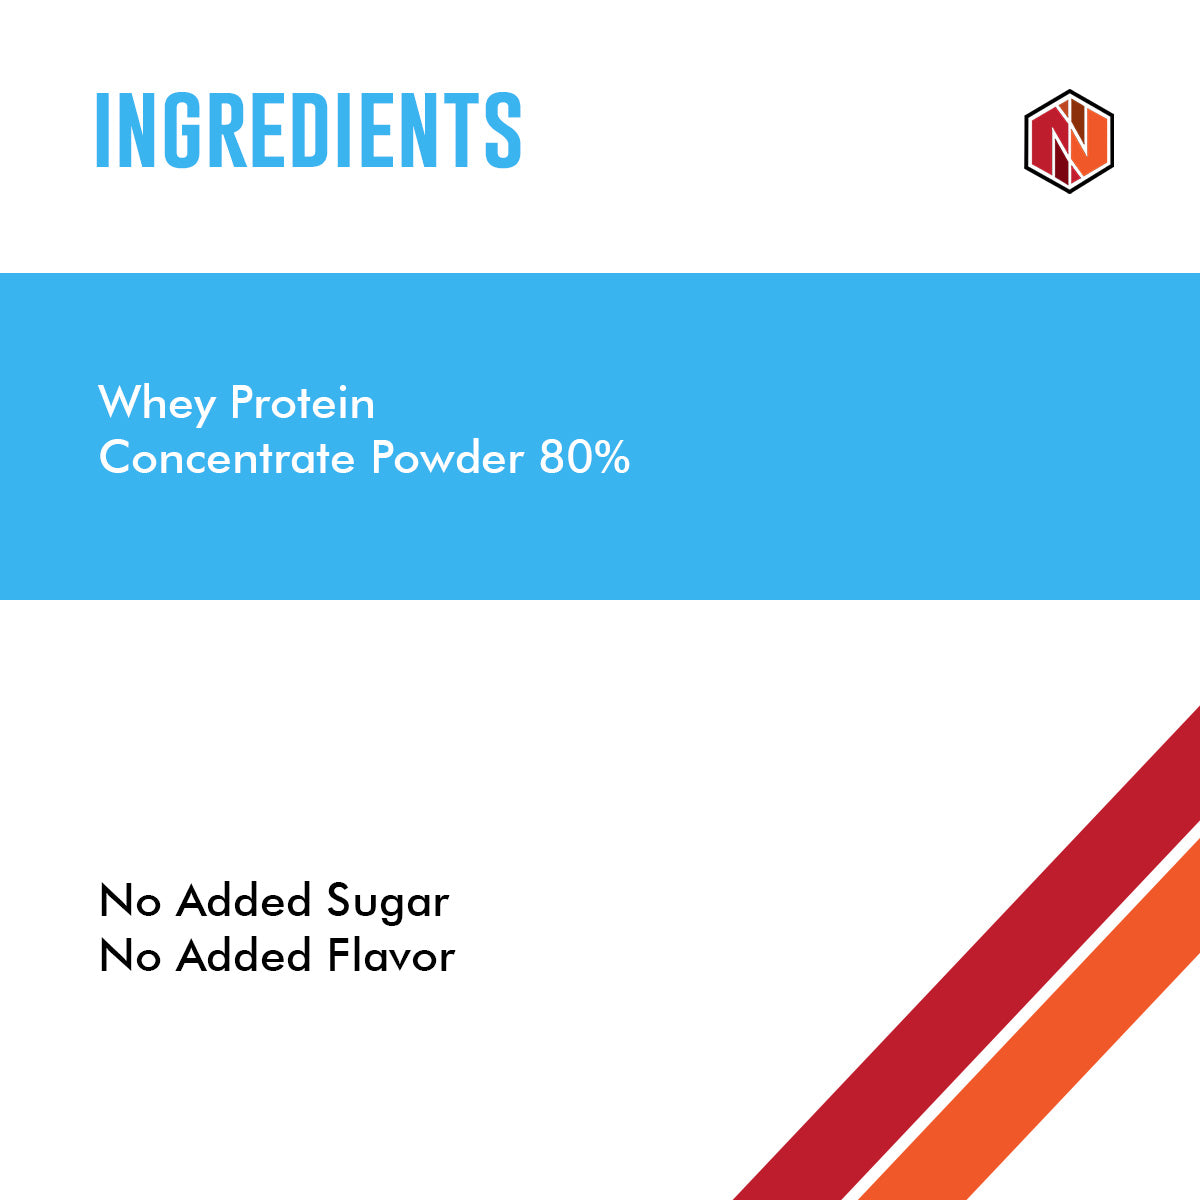 Ingredients of Raw Whey Protein